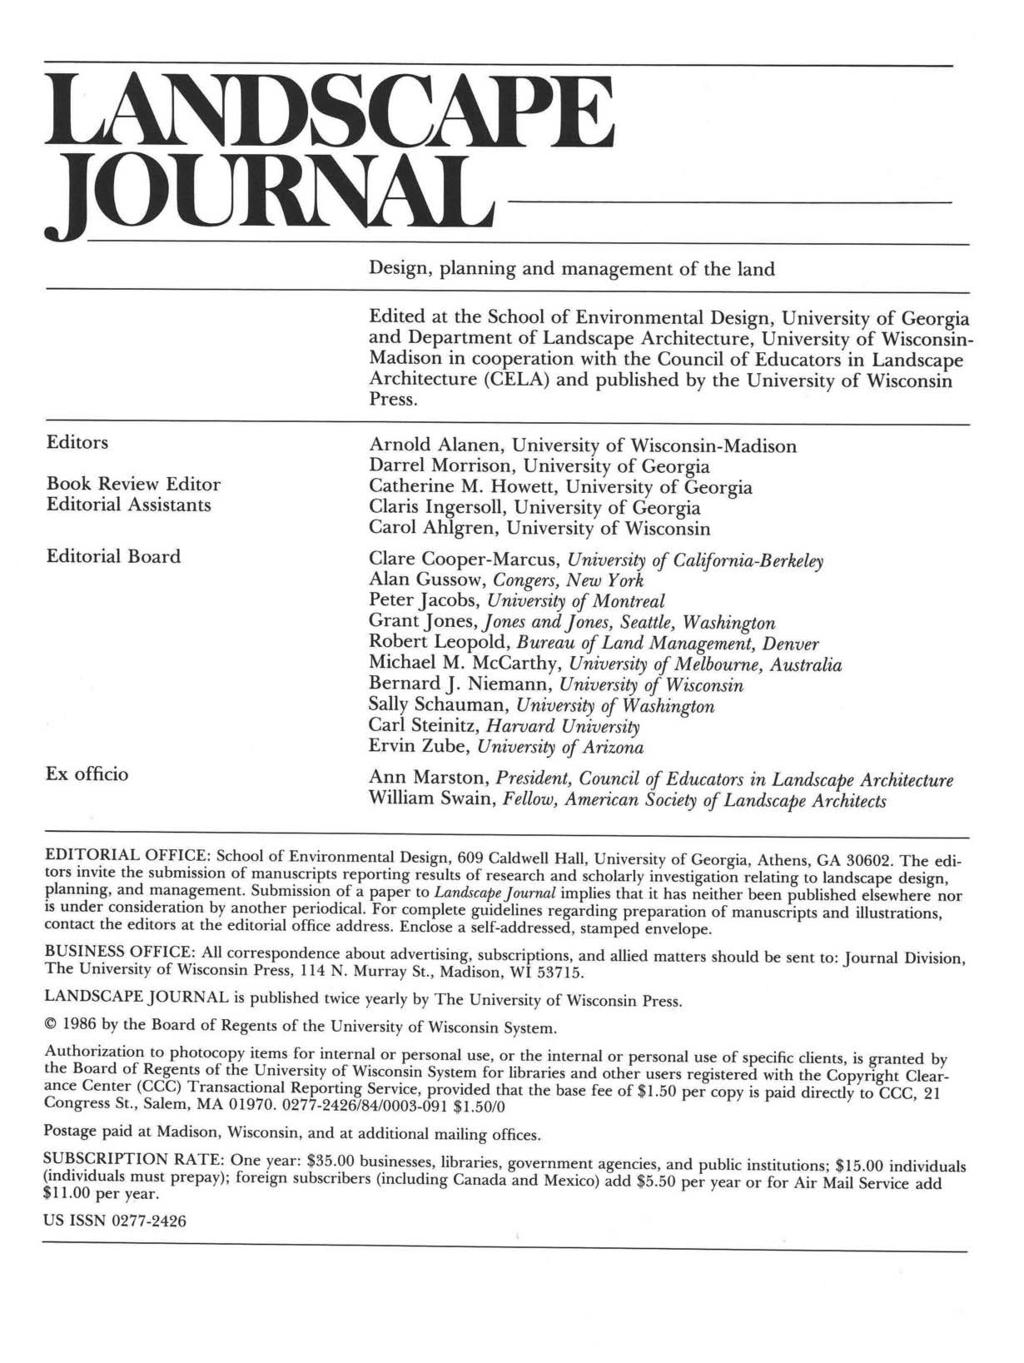 JOURNAL Design, planning and management of the land Edited at the School of Environmental Design, University of Georgia and, University of Wisconsin- Madison in cooperation with the Council of